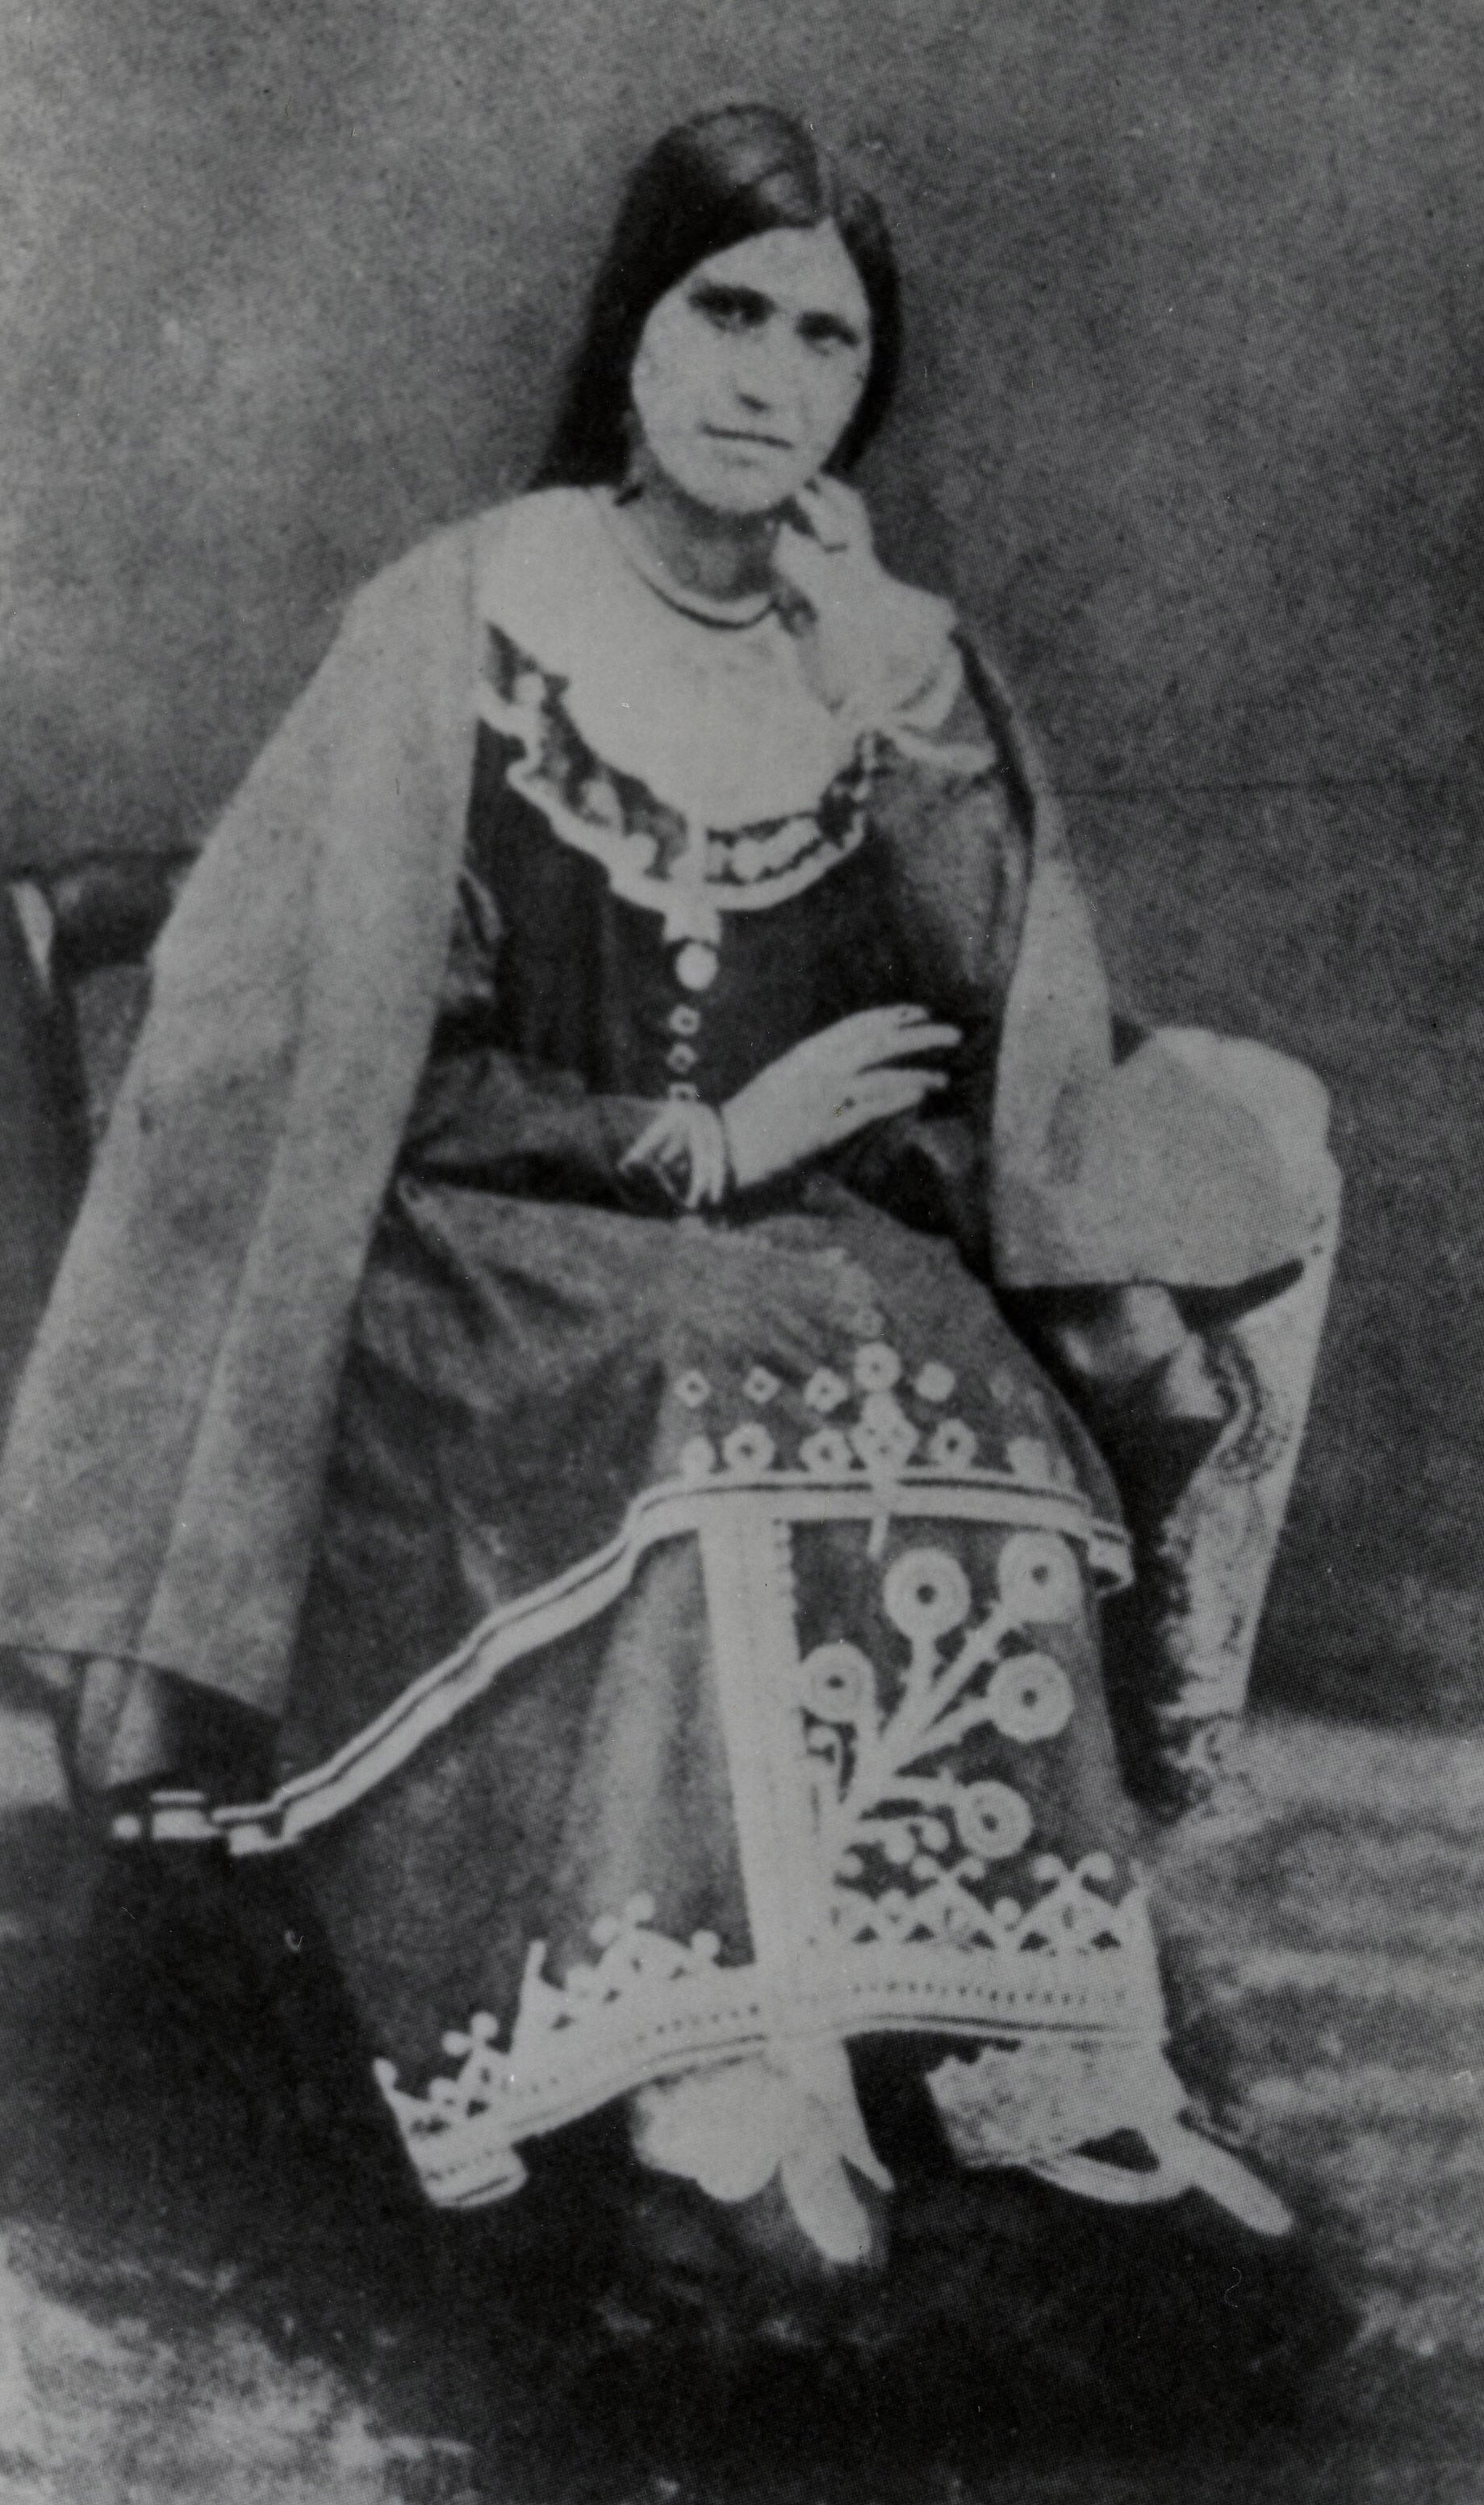 Caroline (Ga:hahno) Parker poses for a black and white photo, seated wearing a dress and cloak.